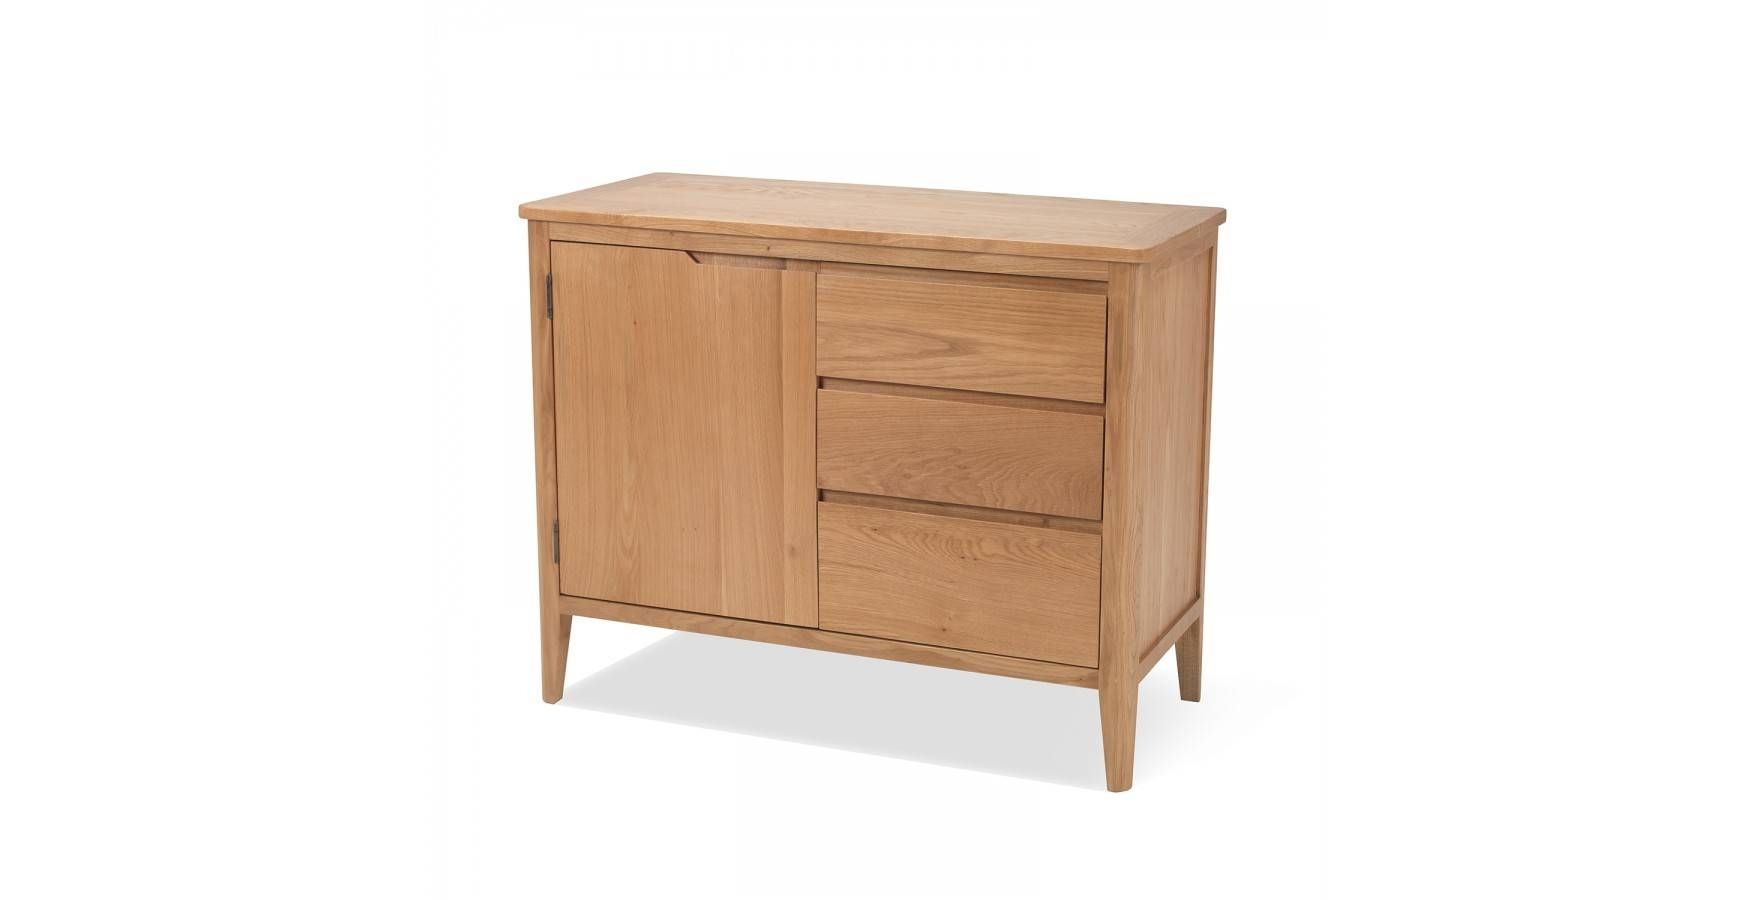 Cadley Oak Small Sideboard With Drawers – Lifestyle Furniture Uk For Small Sideboards With Drawers (Photo 2 of 30)